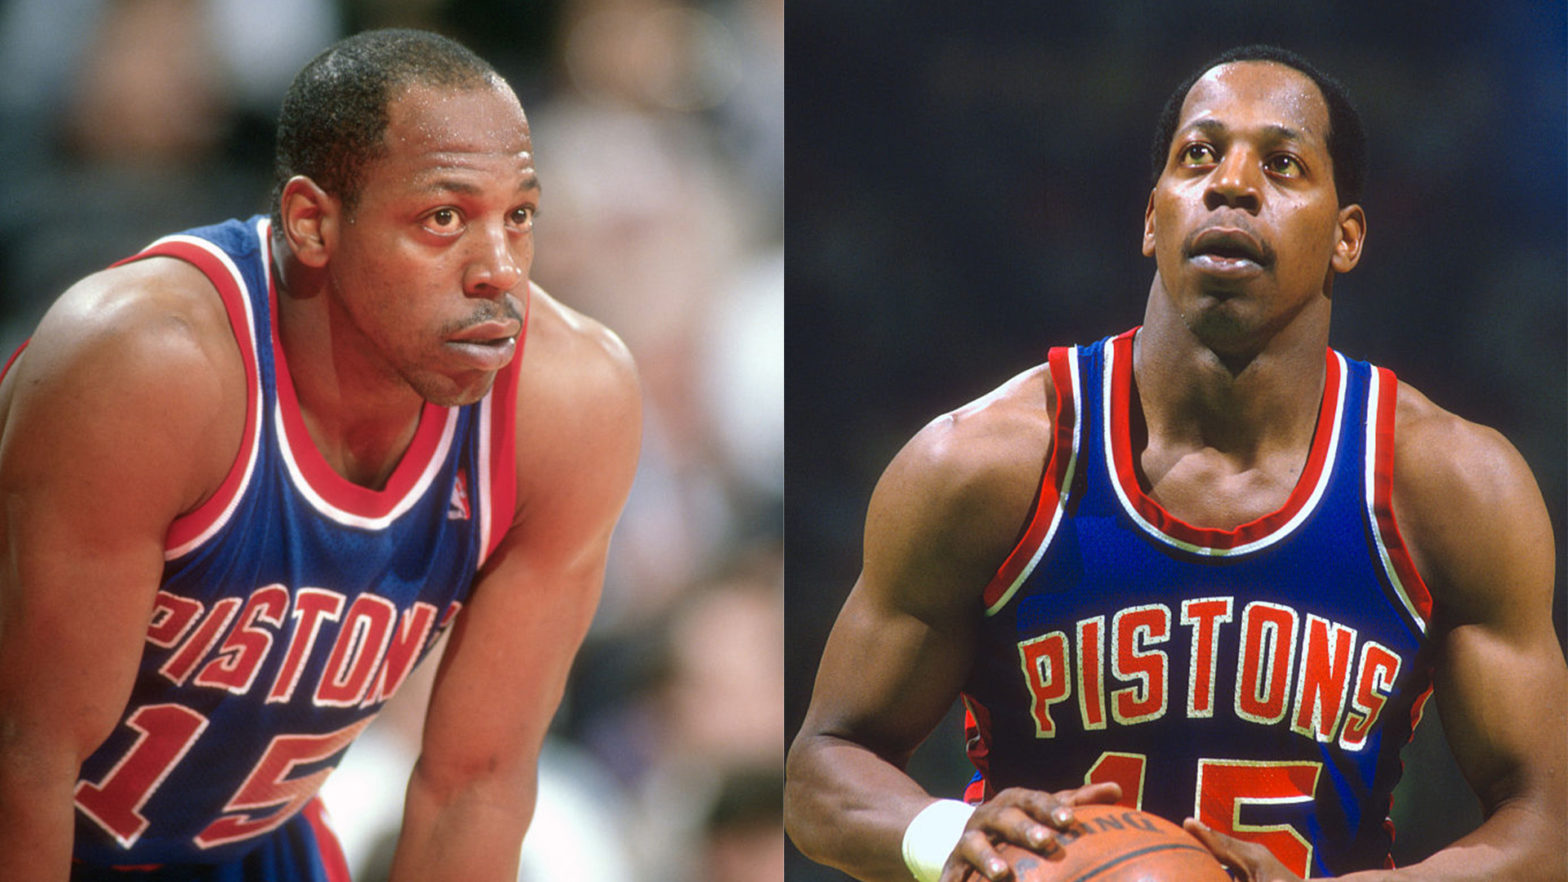 How Vinnie Johnson Retired And Created An Enterprise Generating Billions In Revenue But Earned $5M In The NBA